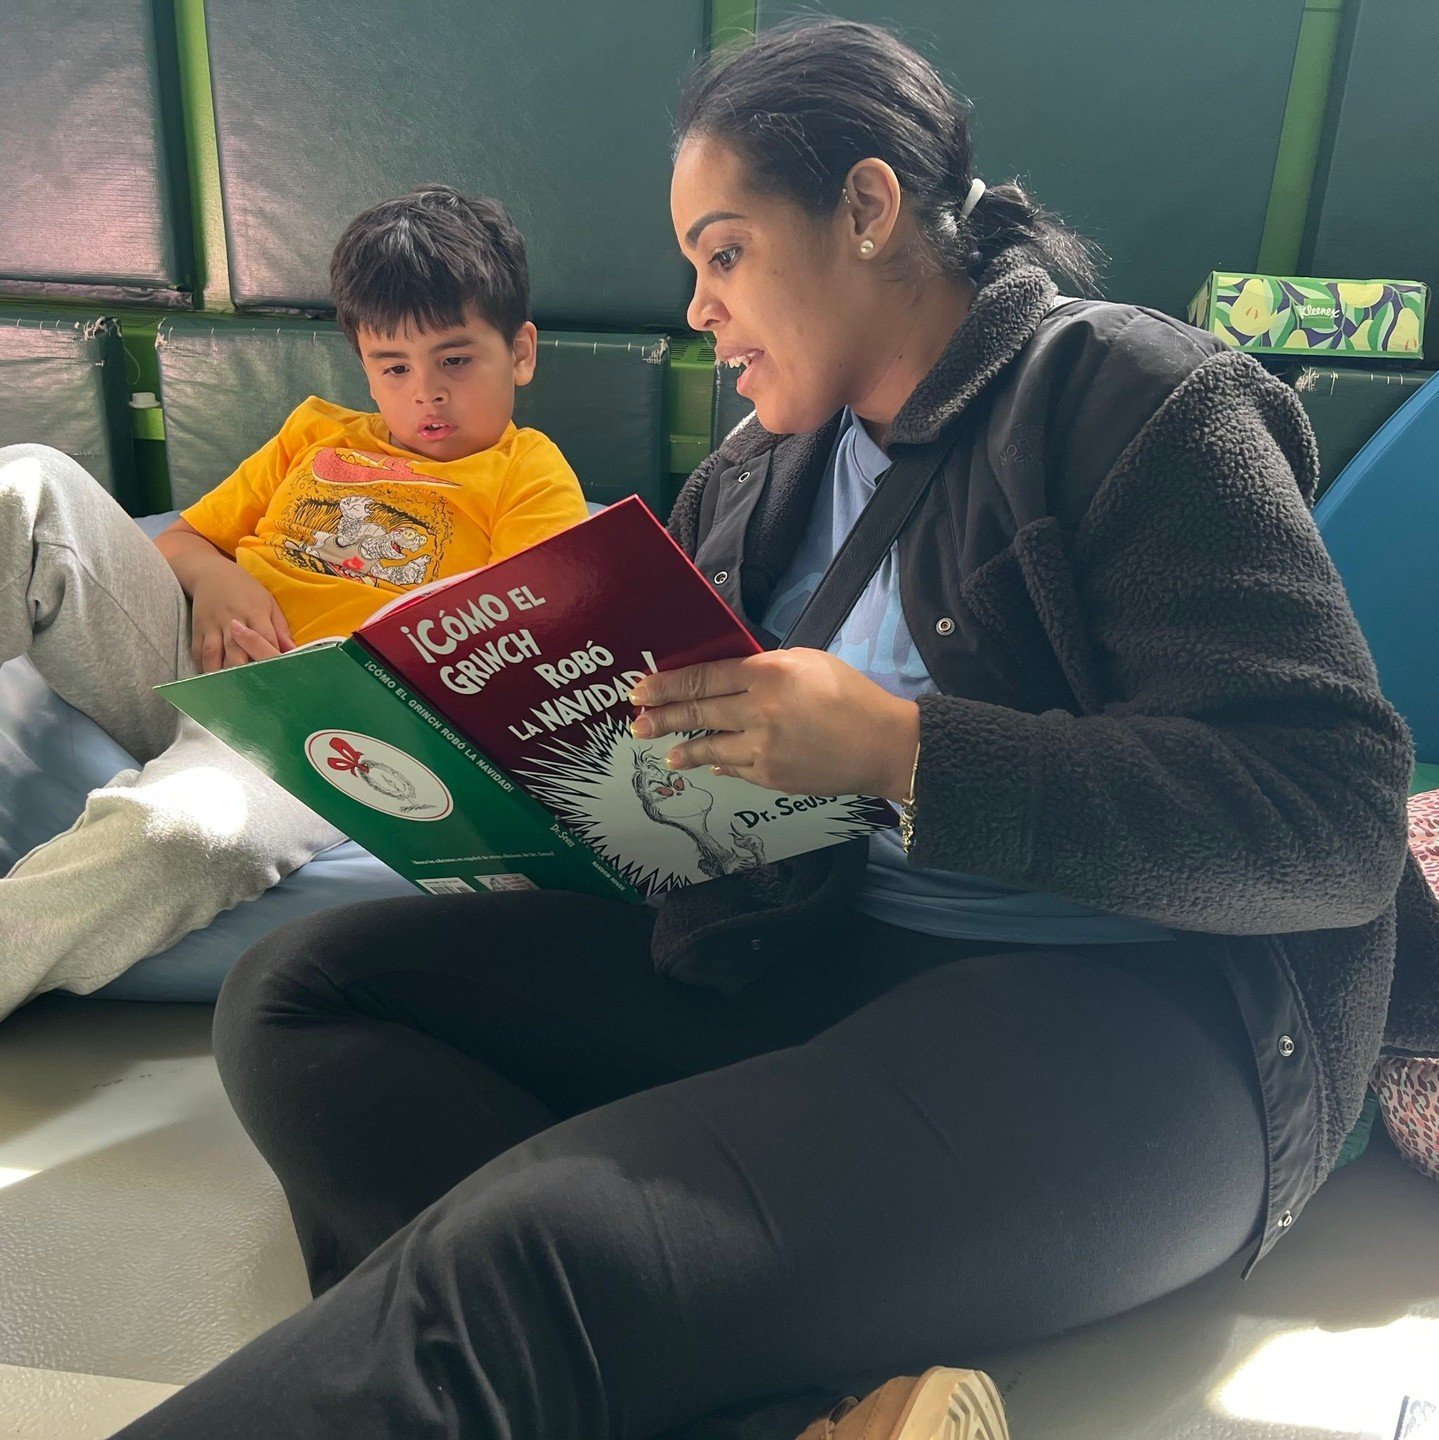 Last week, Study Buddies Connect held an event called &ldquo;Snuggle Up and Read,&rdquo; where they invited a small group of parents to talk about their experience reading out loud to their children. Study Buddies Connect staff helped parents downloa